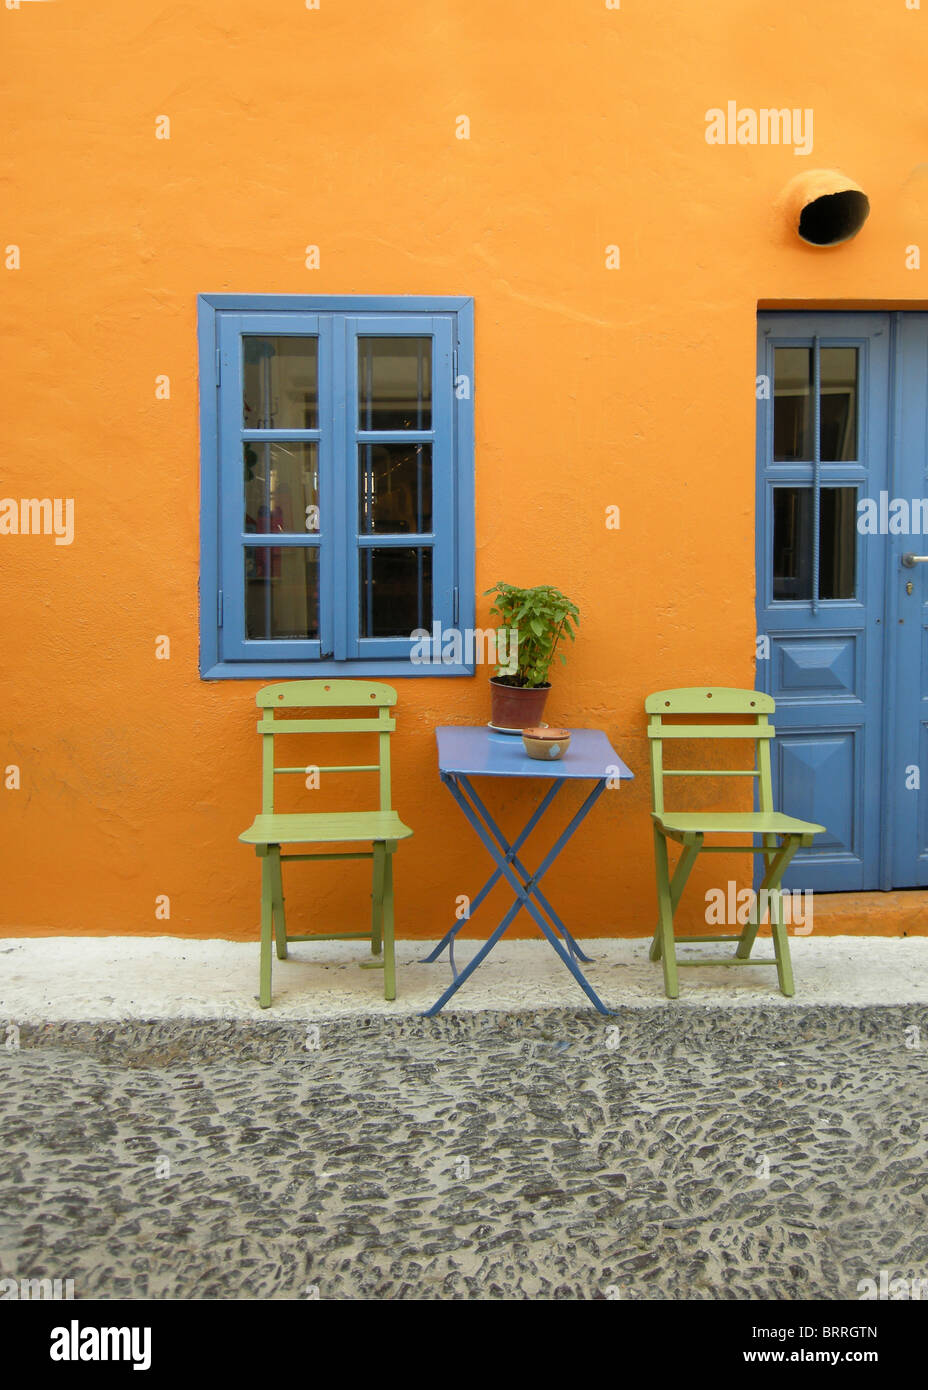 Chairs And A Table Outside A Brightly Colored House Front On The